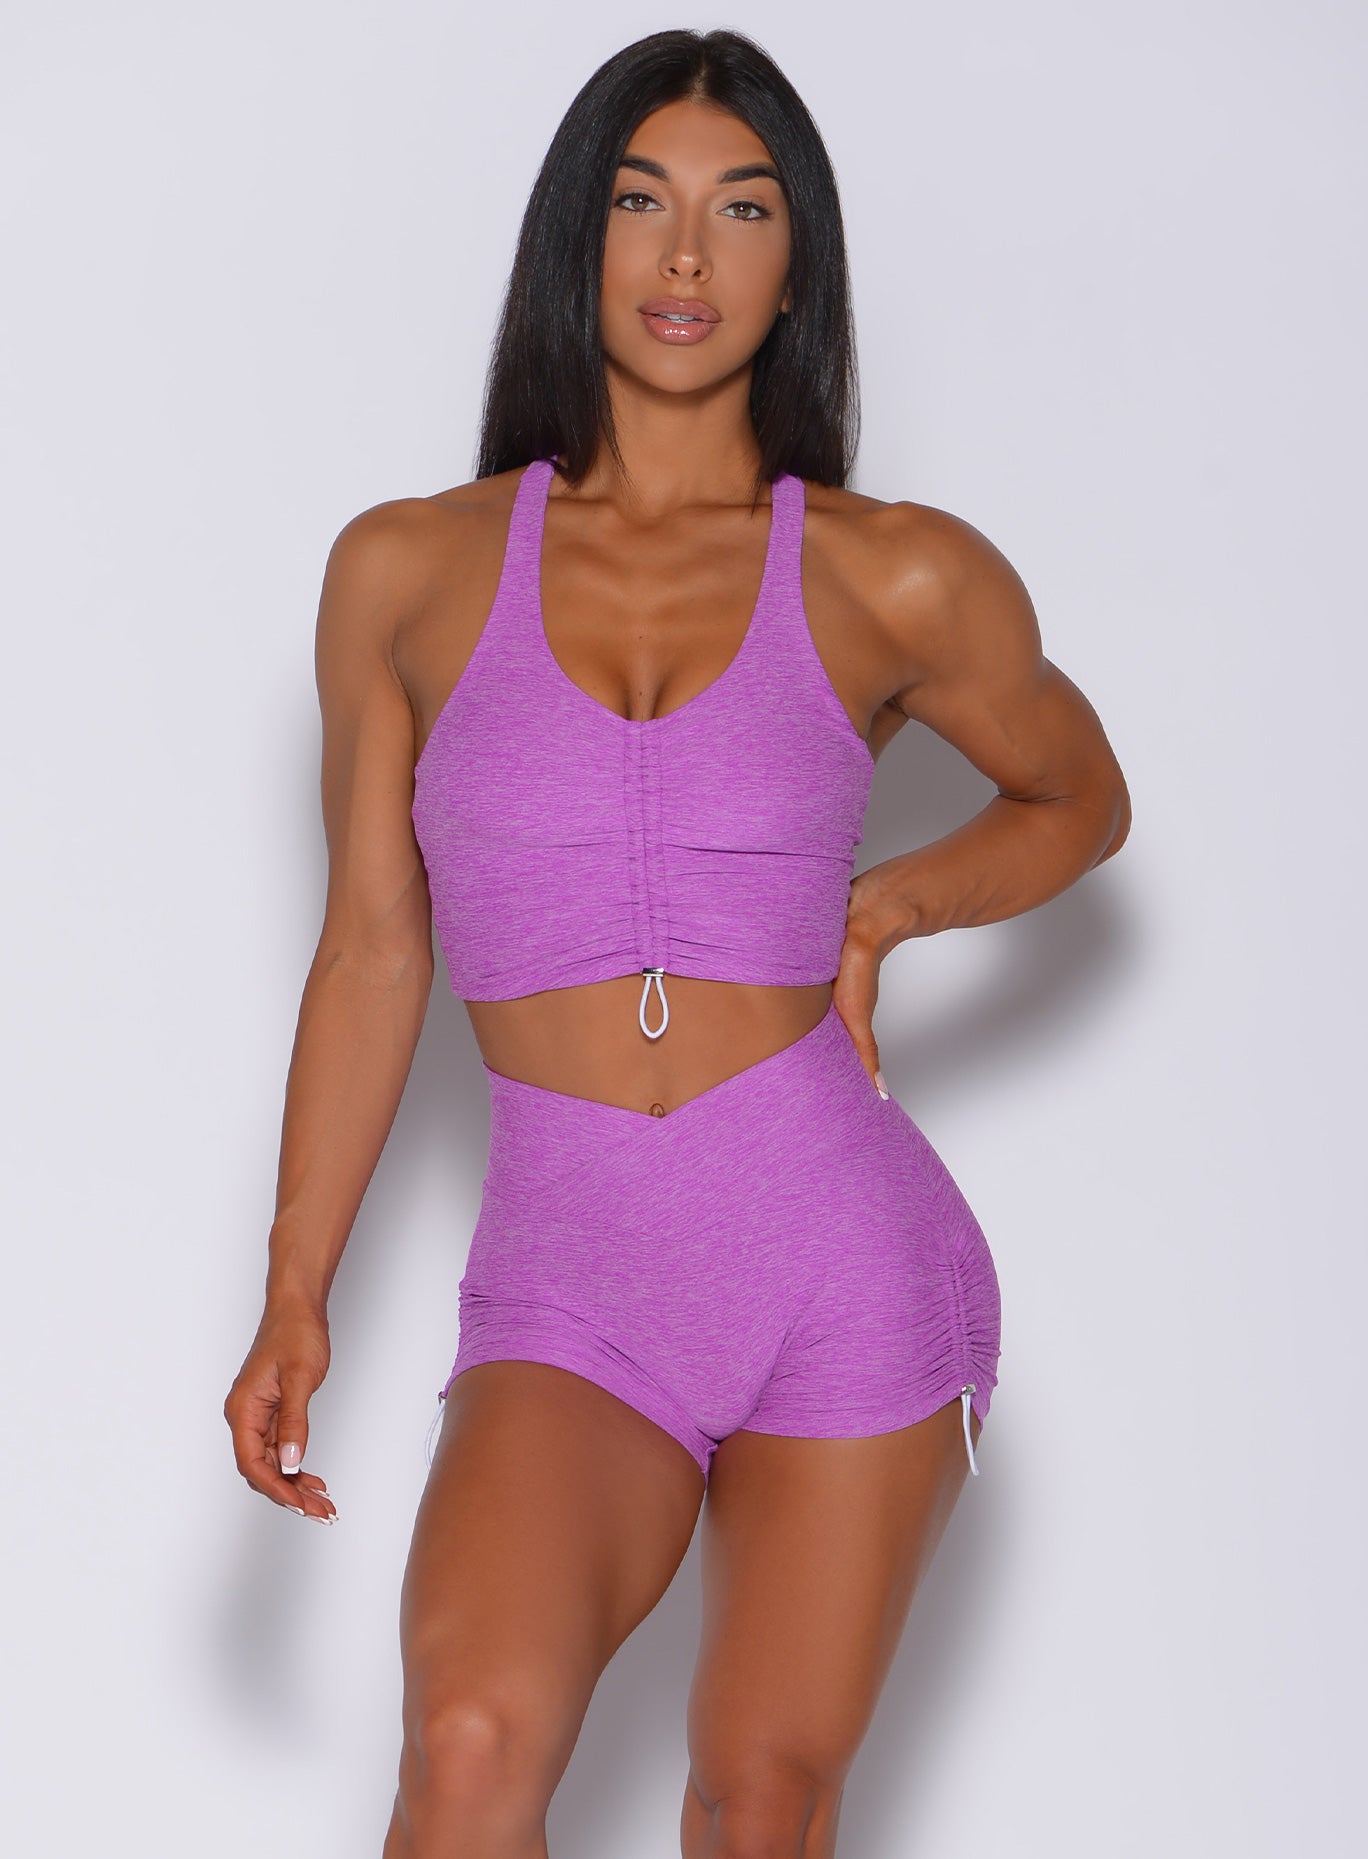 Front profile view of a model wearing our enhance toggle bra in purple rain color and a matching shorts